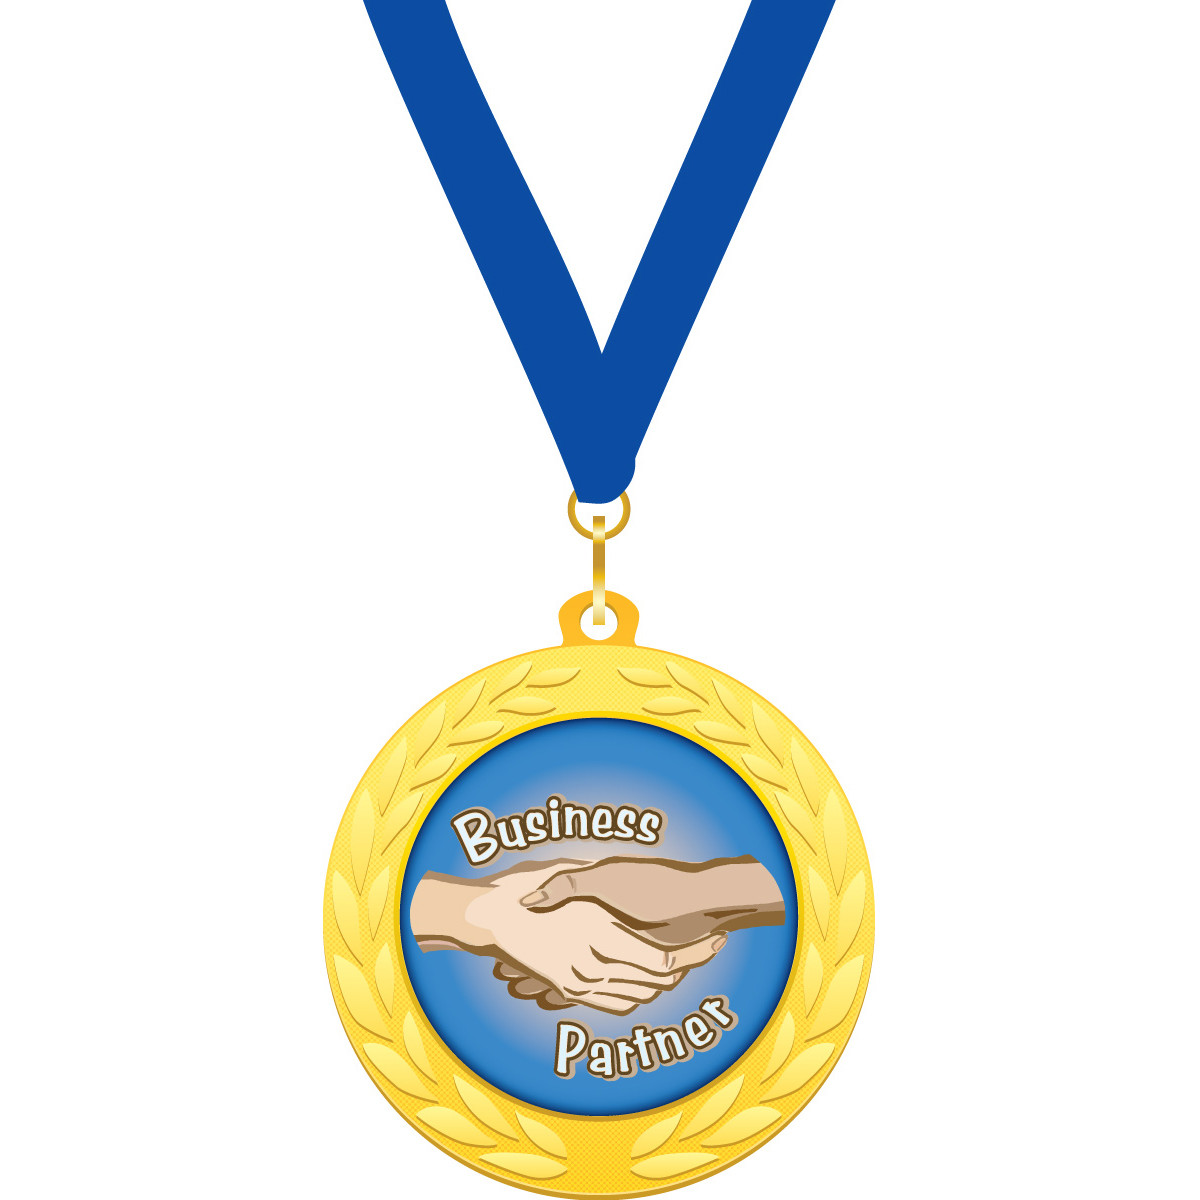 Custom 2 in. Gold Medallion with Blue Neck Ribbon (Business Partners)